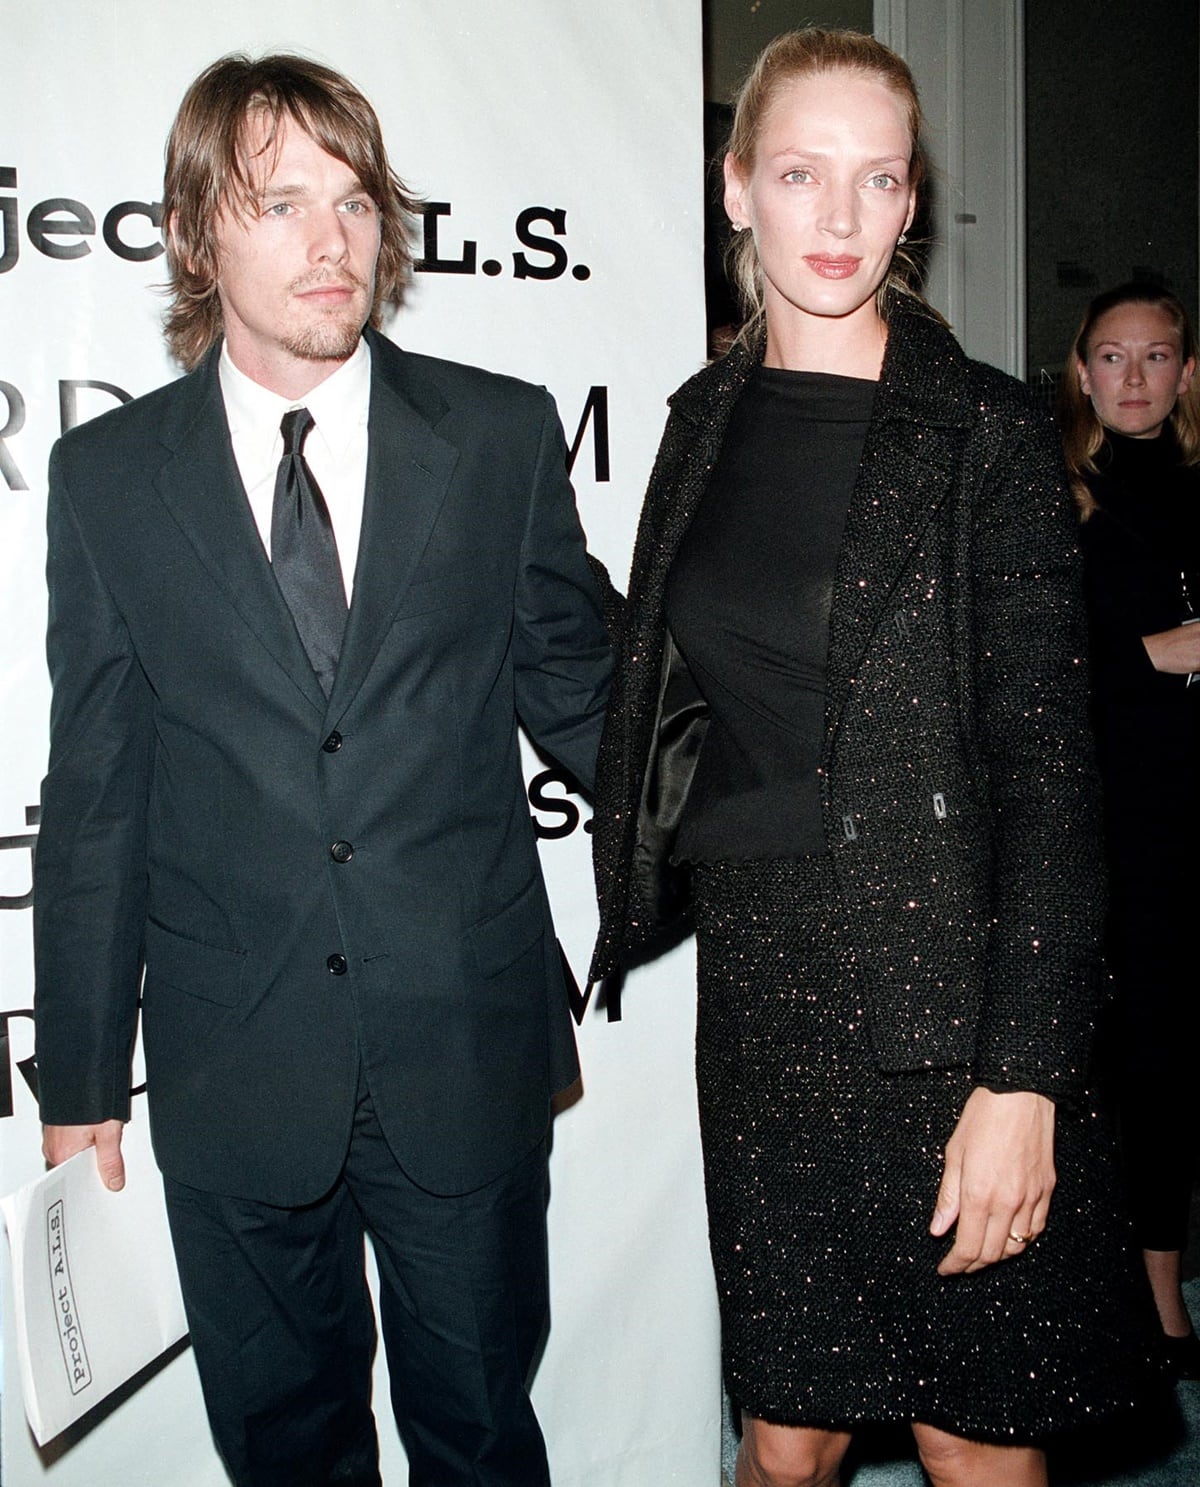 Uma Thurman is taller than Ethan Hawke, whom she married in 1998 and divorced in 2005